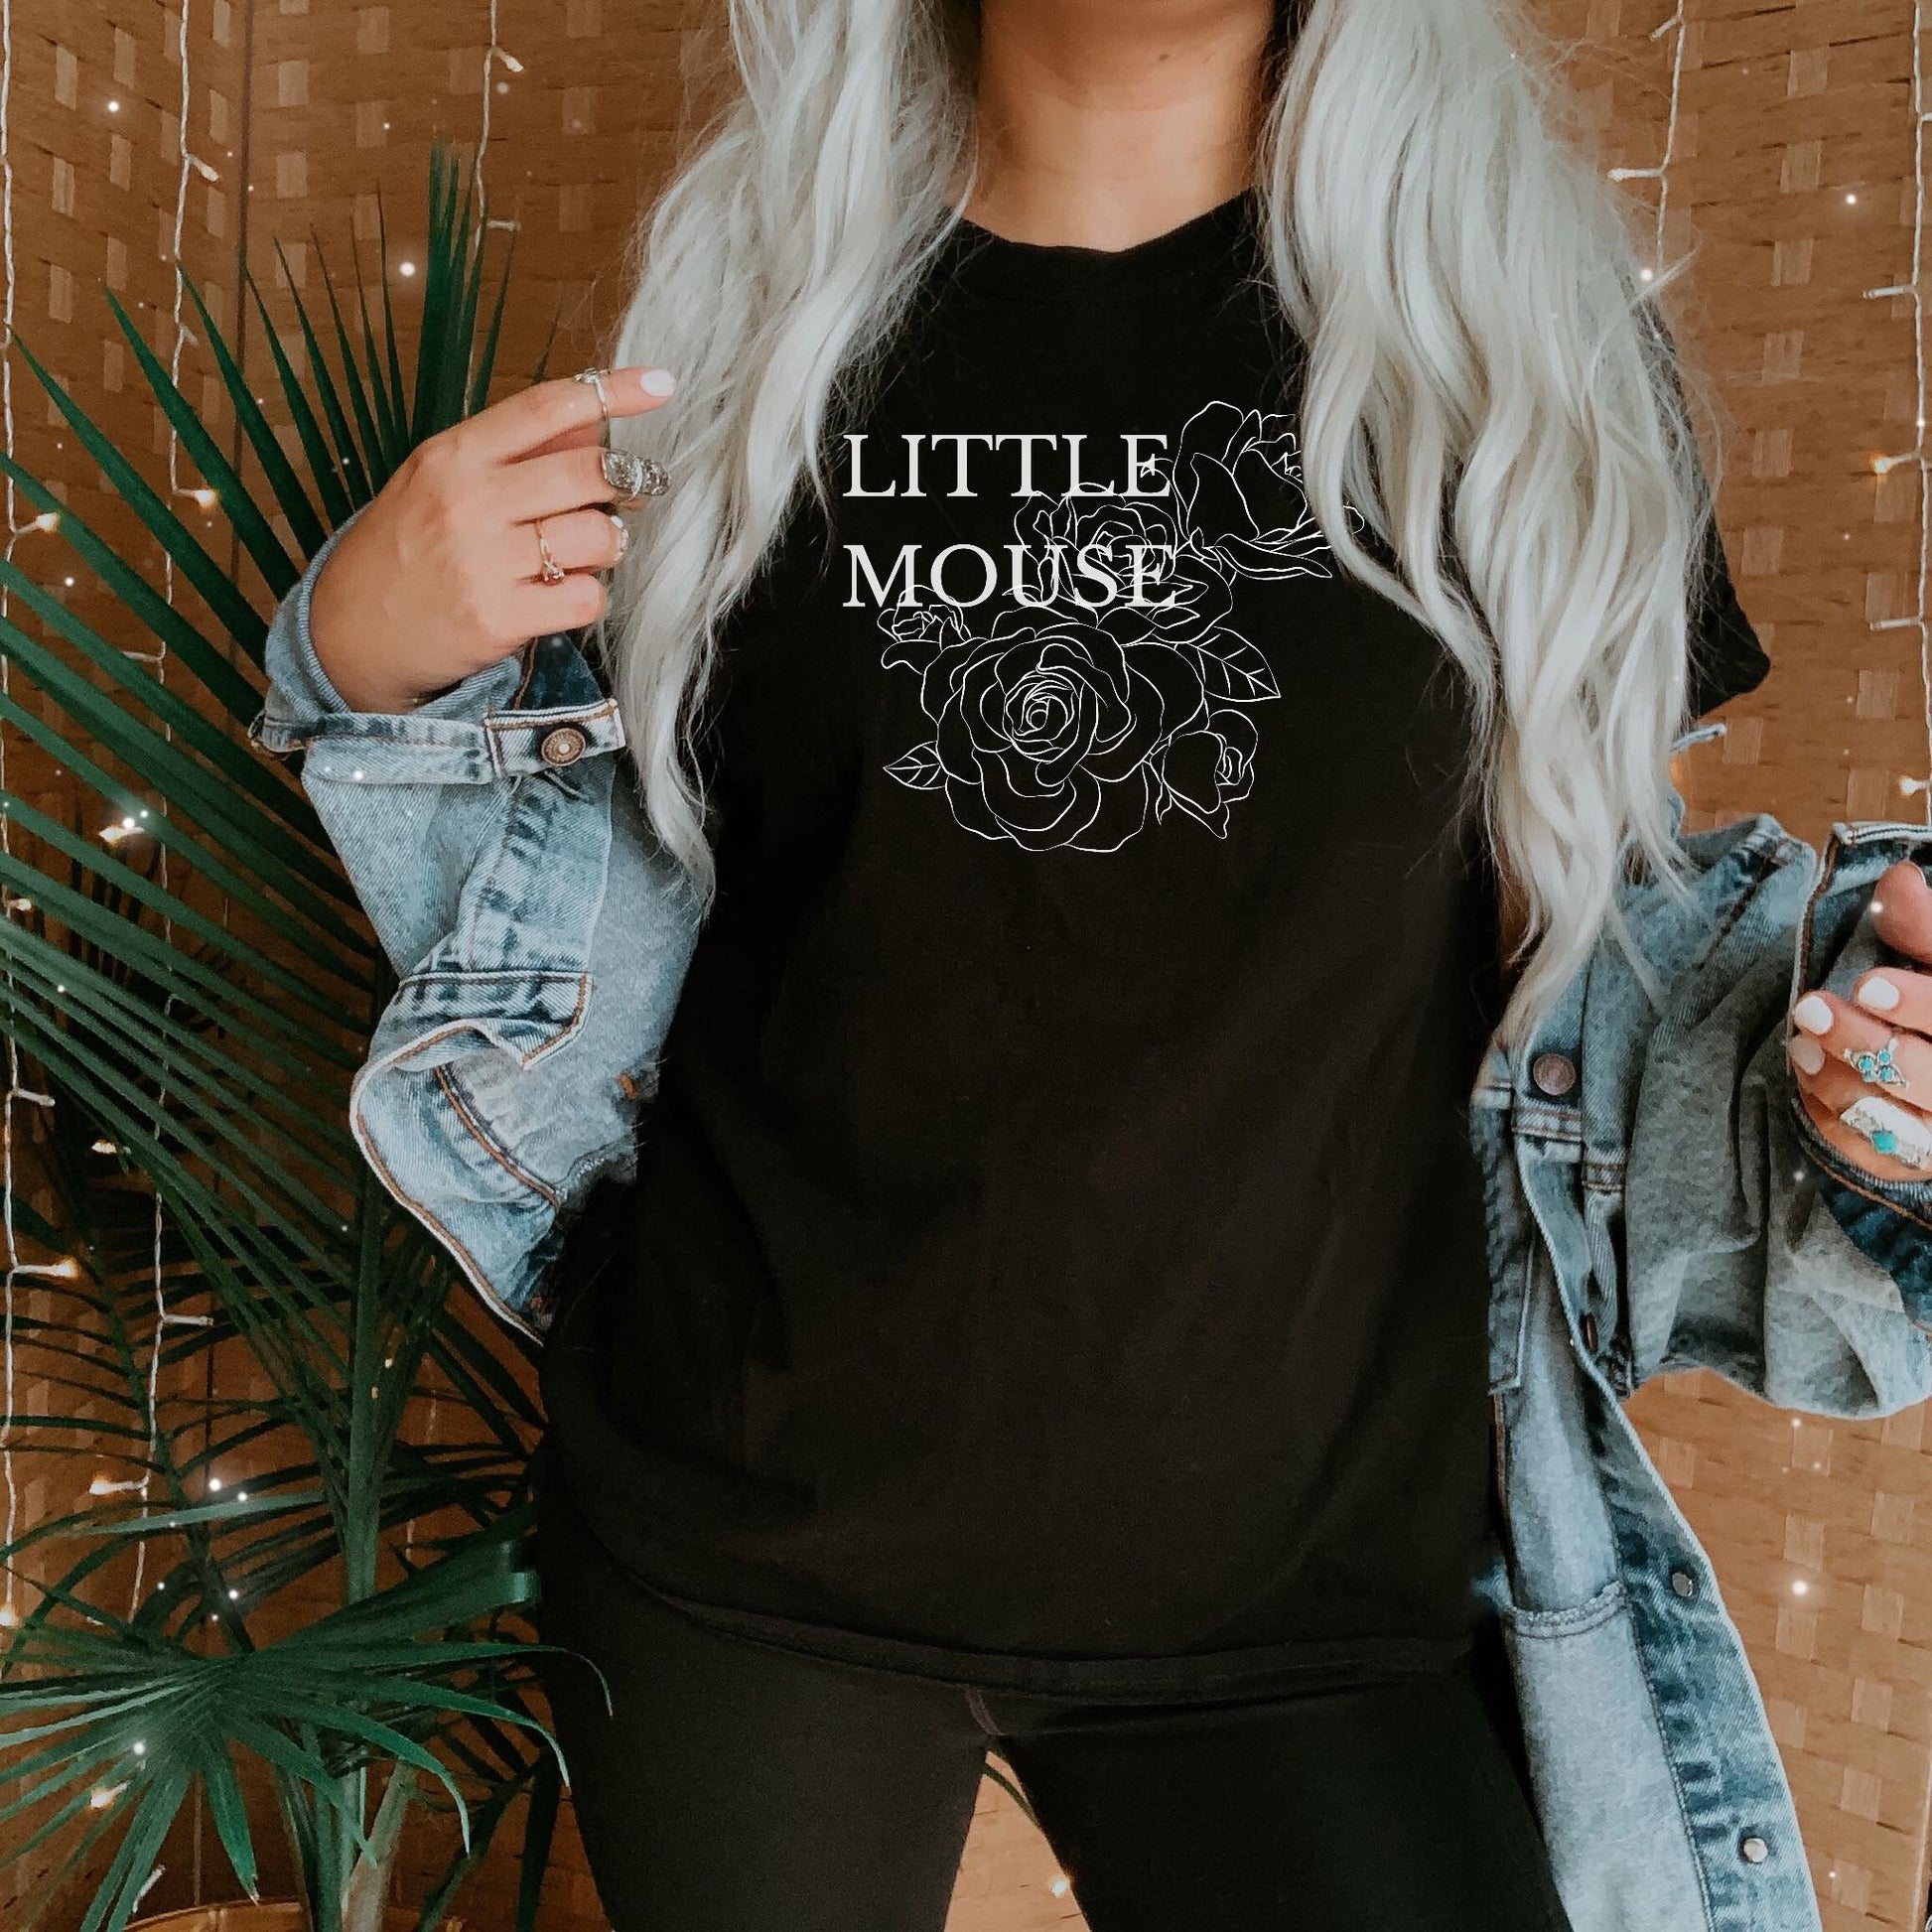 inspired – Mouse rose and Little t-shirt Designs Haunting Adeline with Romantasy design.